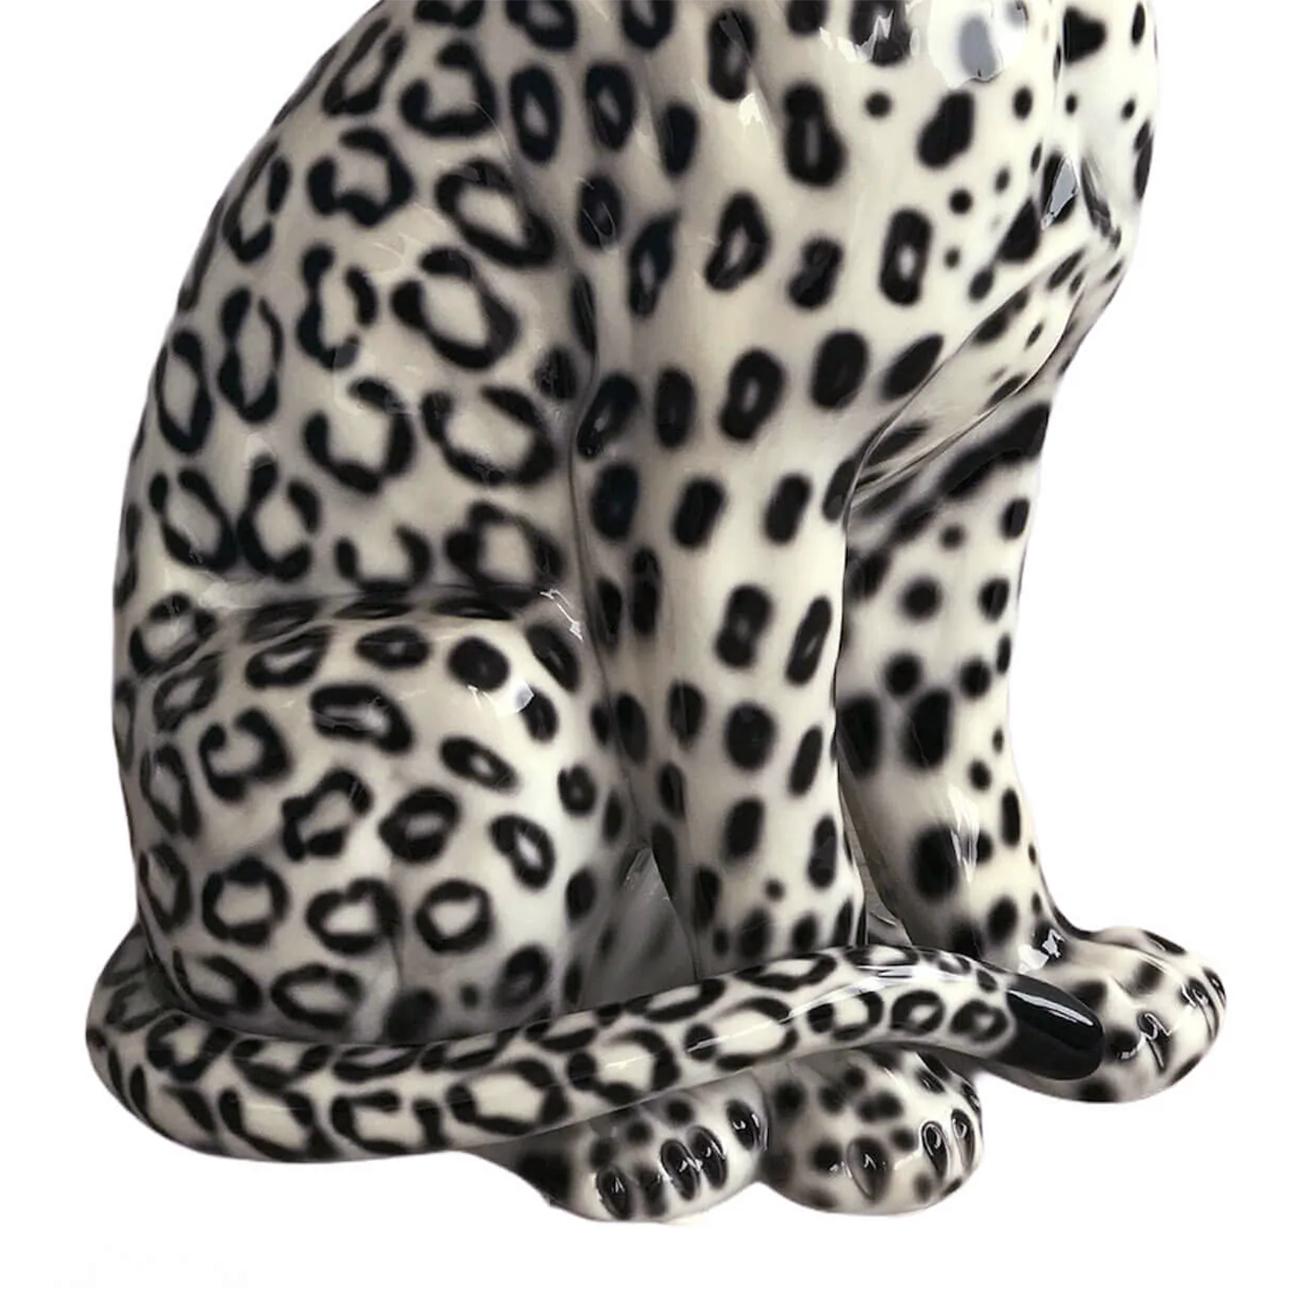 Contemporary Leopard Black and White Left Sculpture For Sale